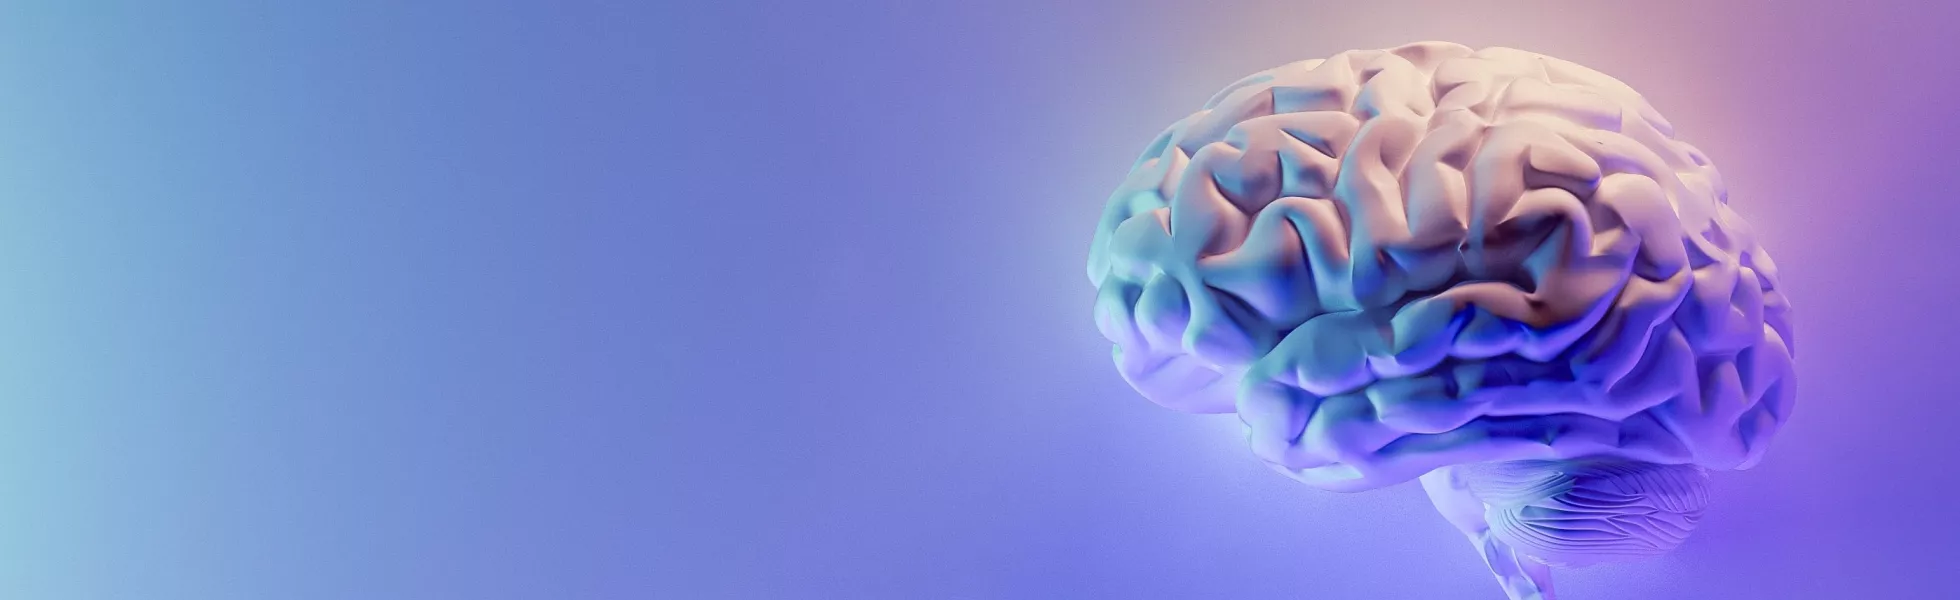 A 3D render of a brain in pastel colors.